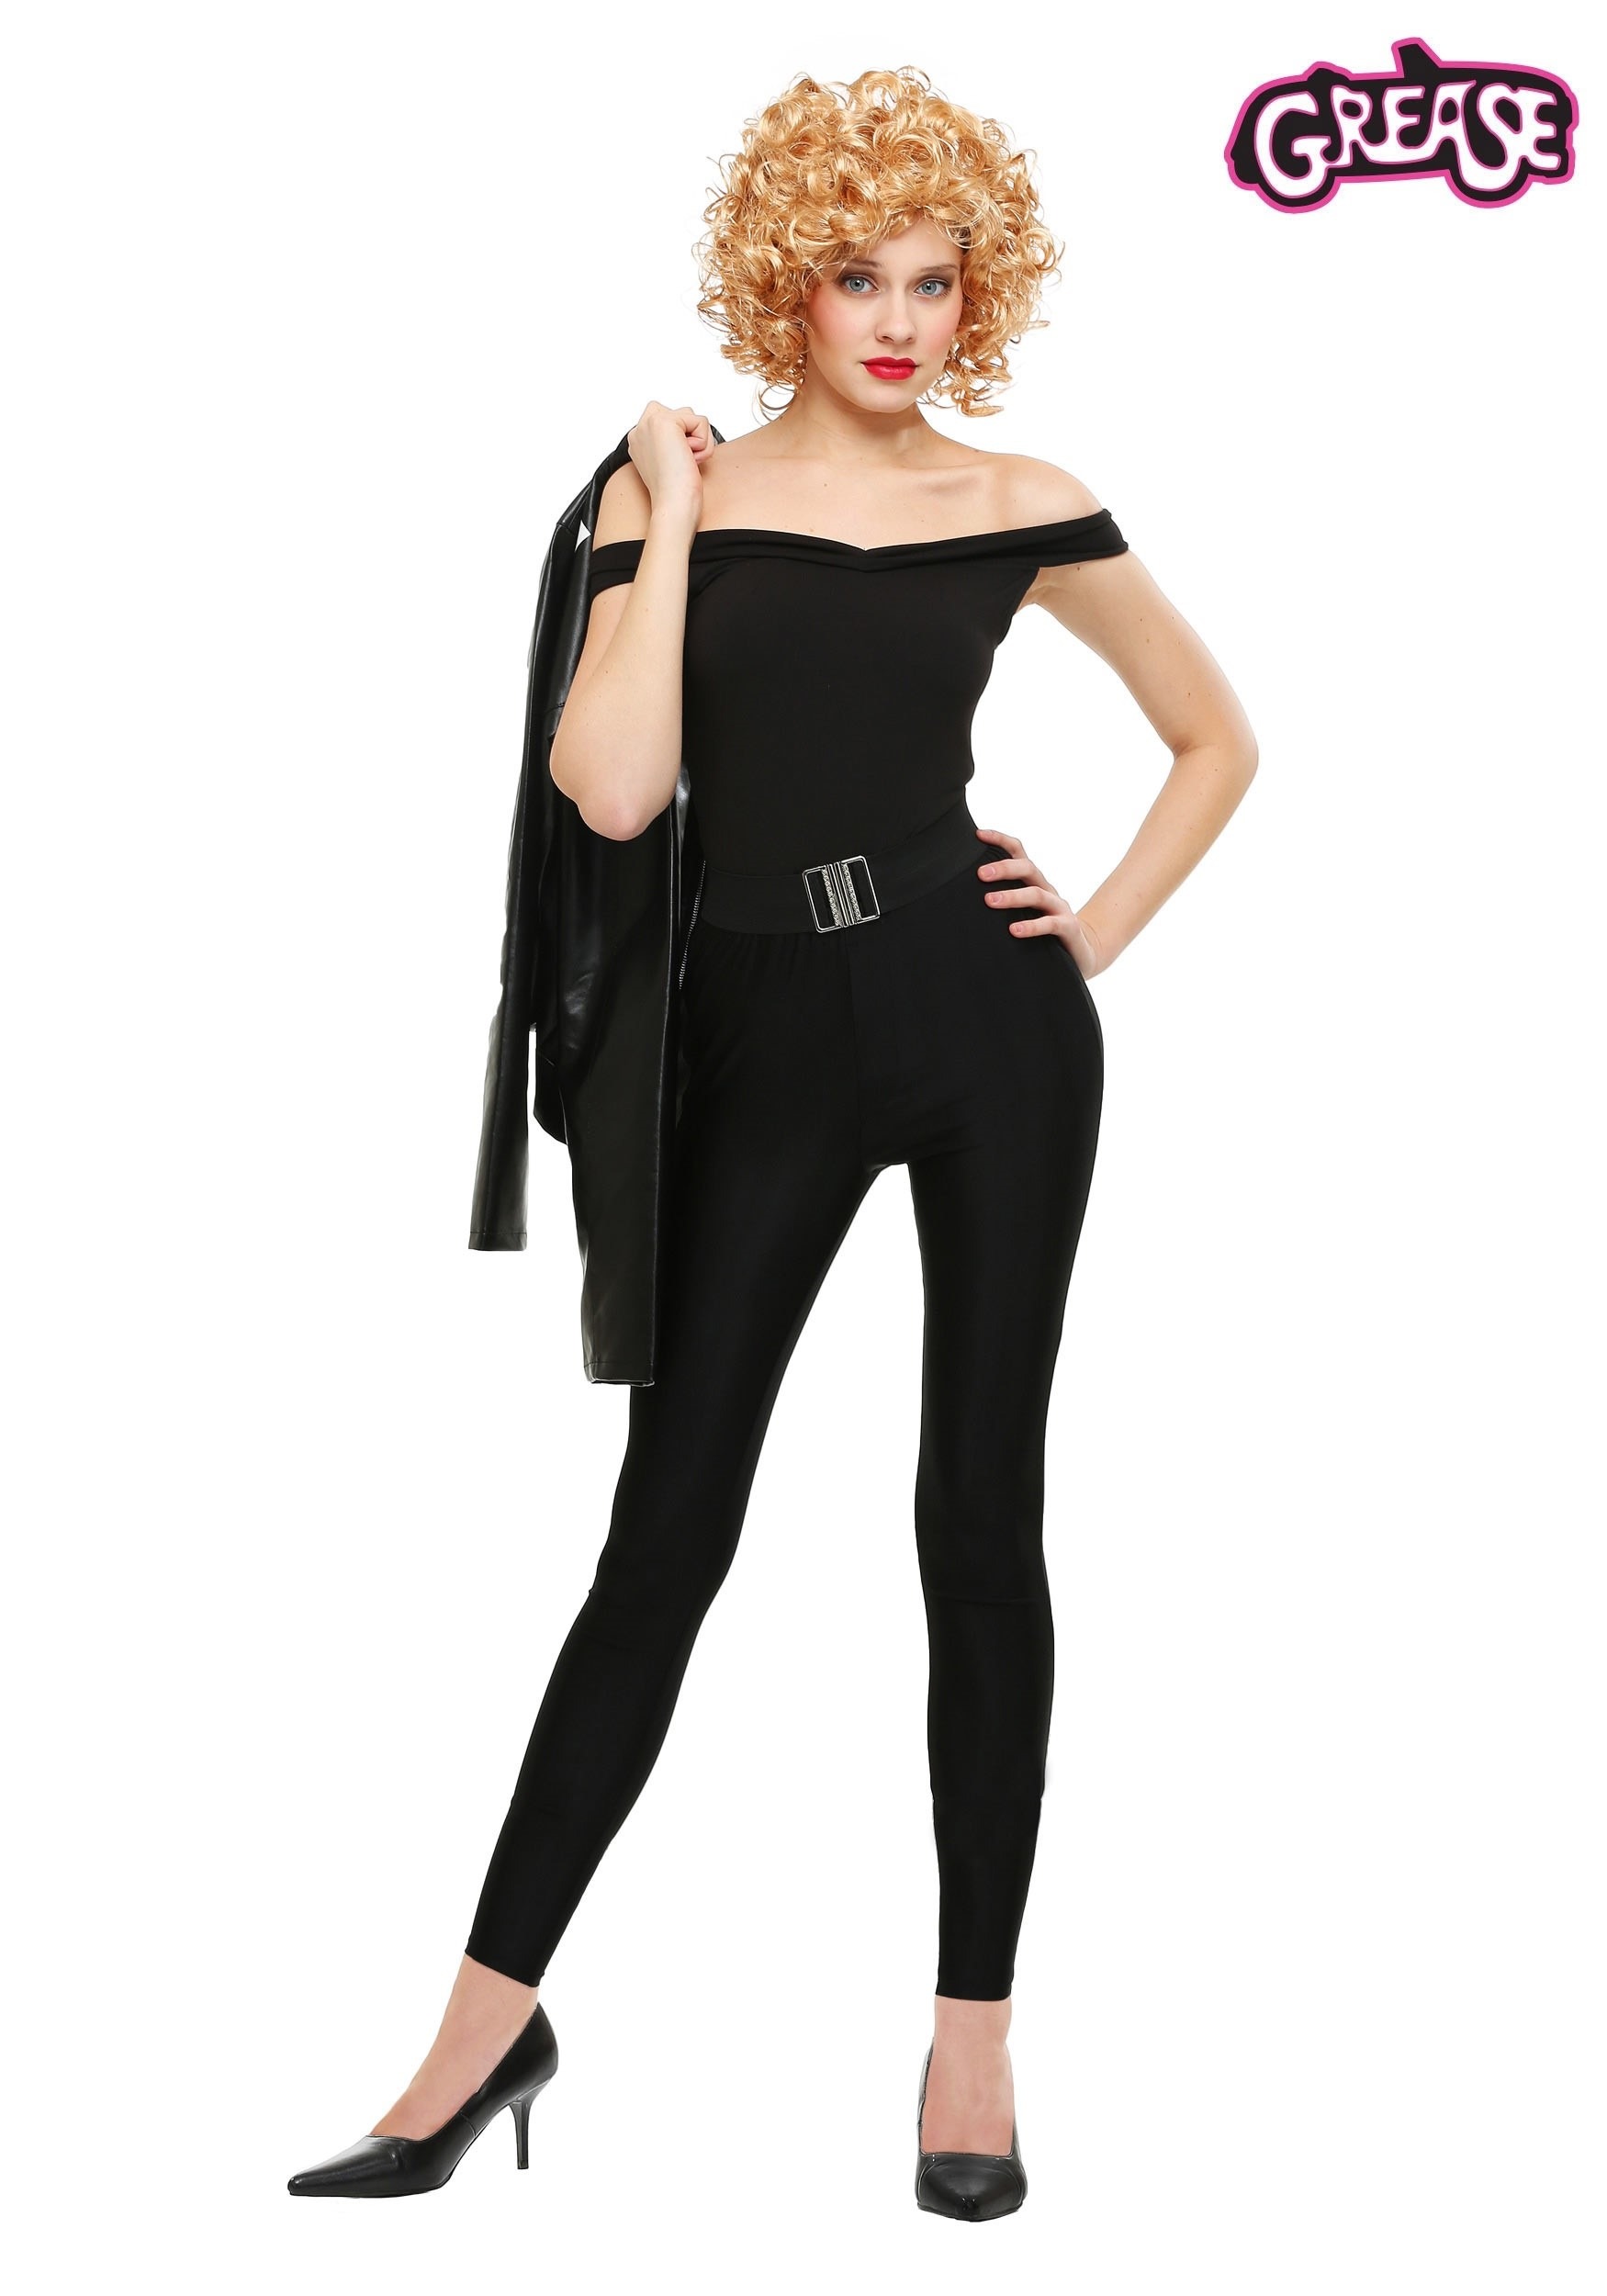 Grease Women’s Plus Size Bad Sandy Costume